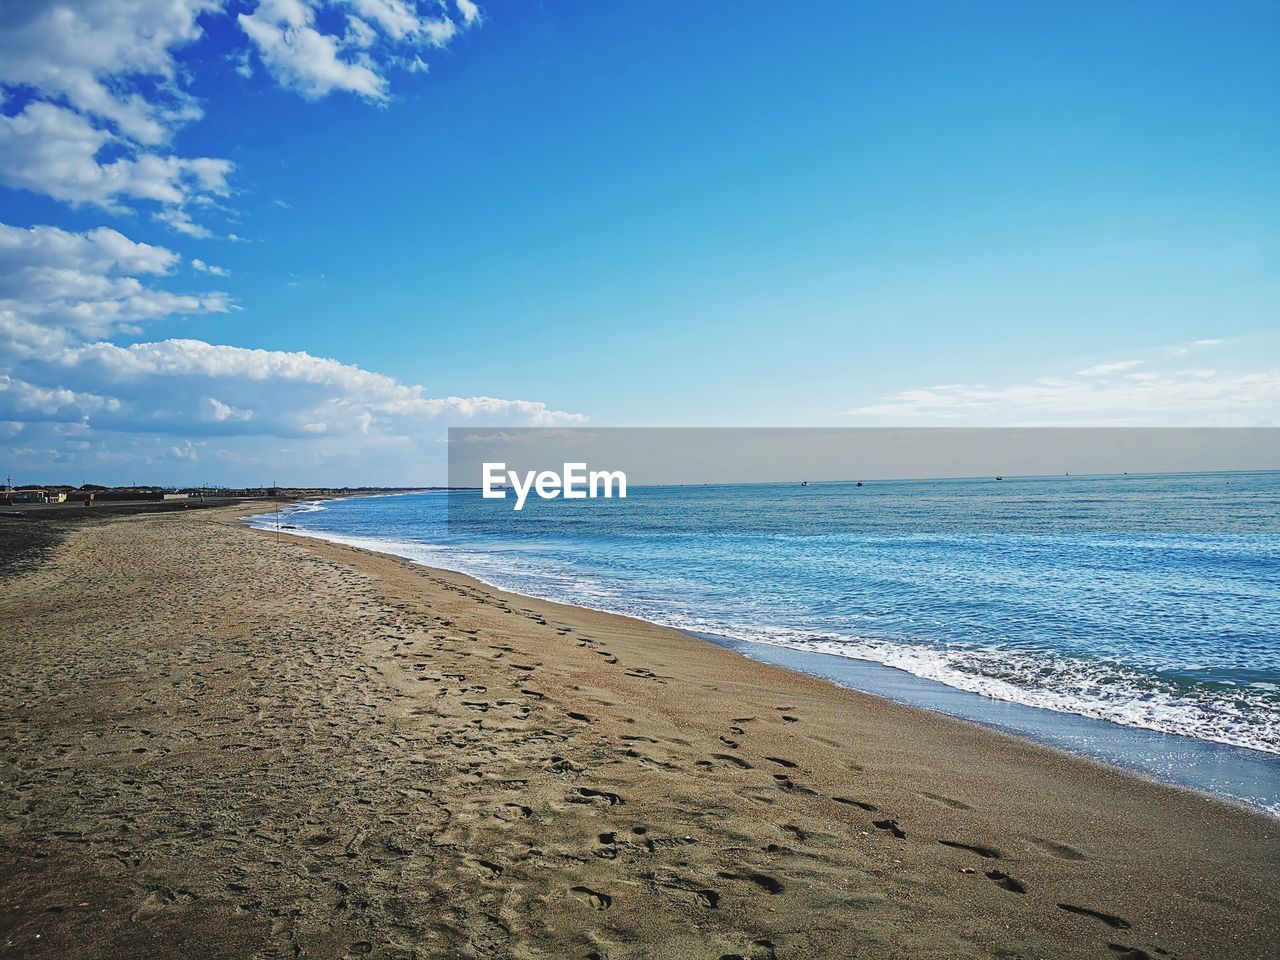 SCENIC VIEW OF SEA AGAINST BLUE SKY